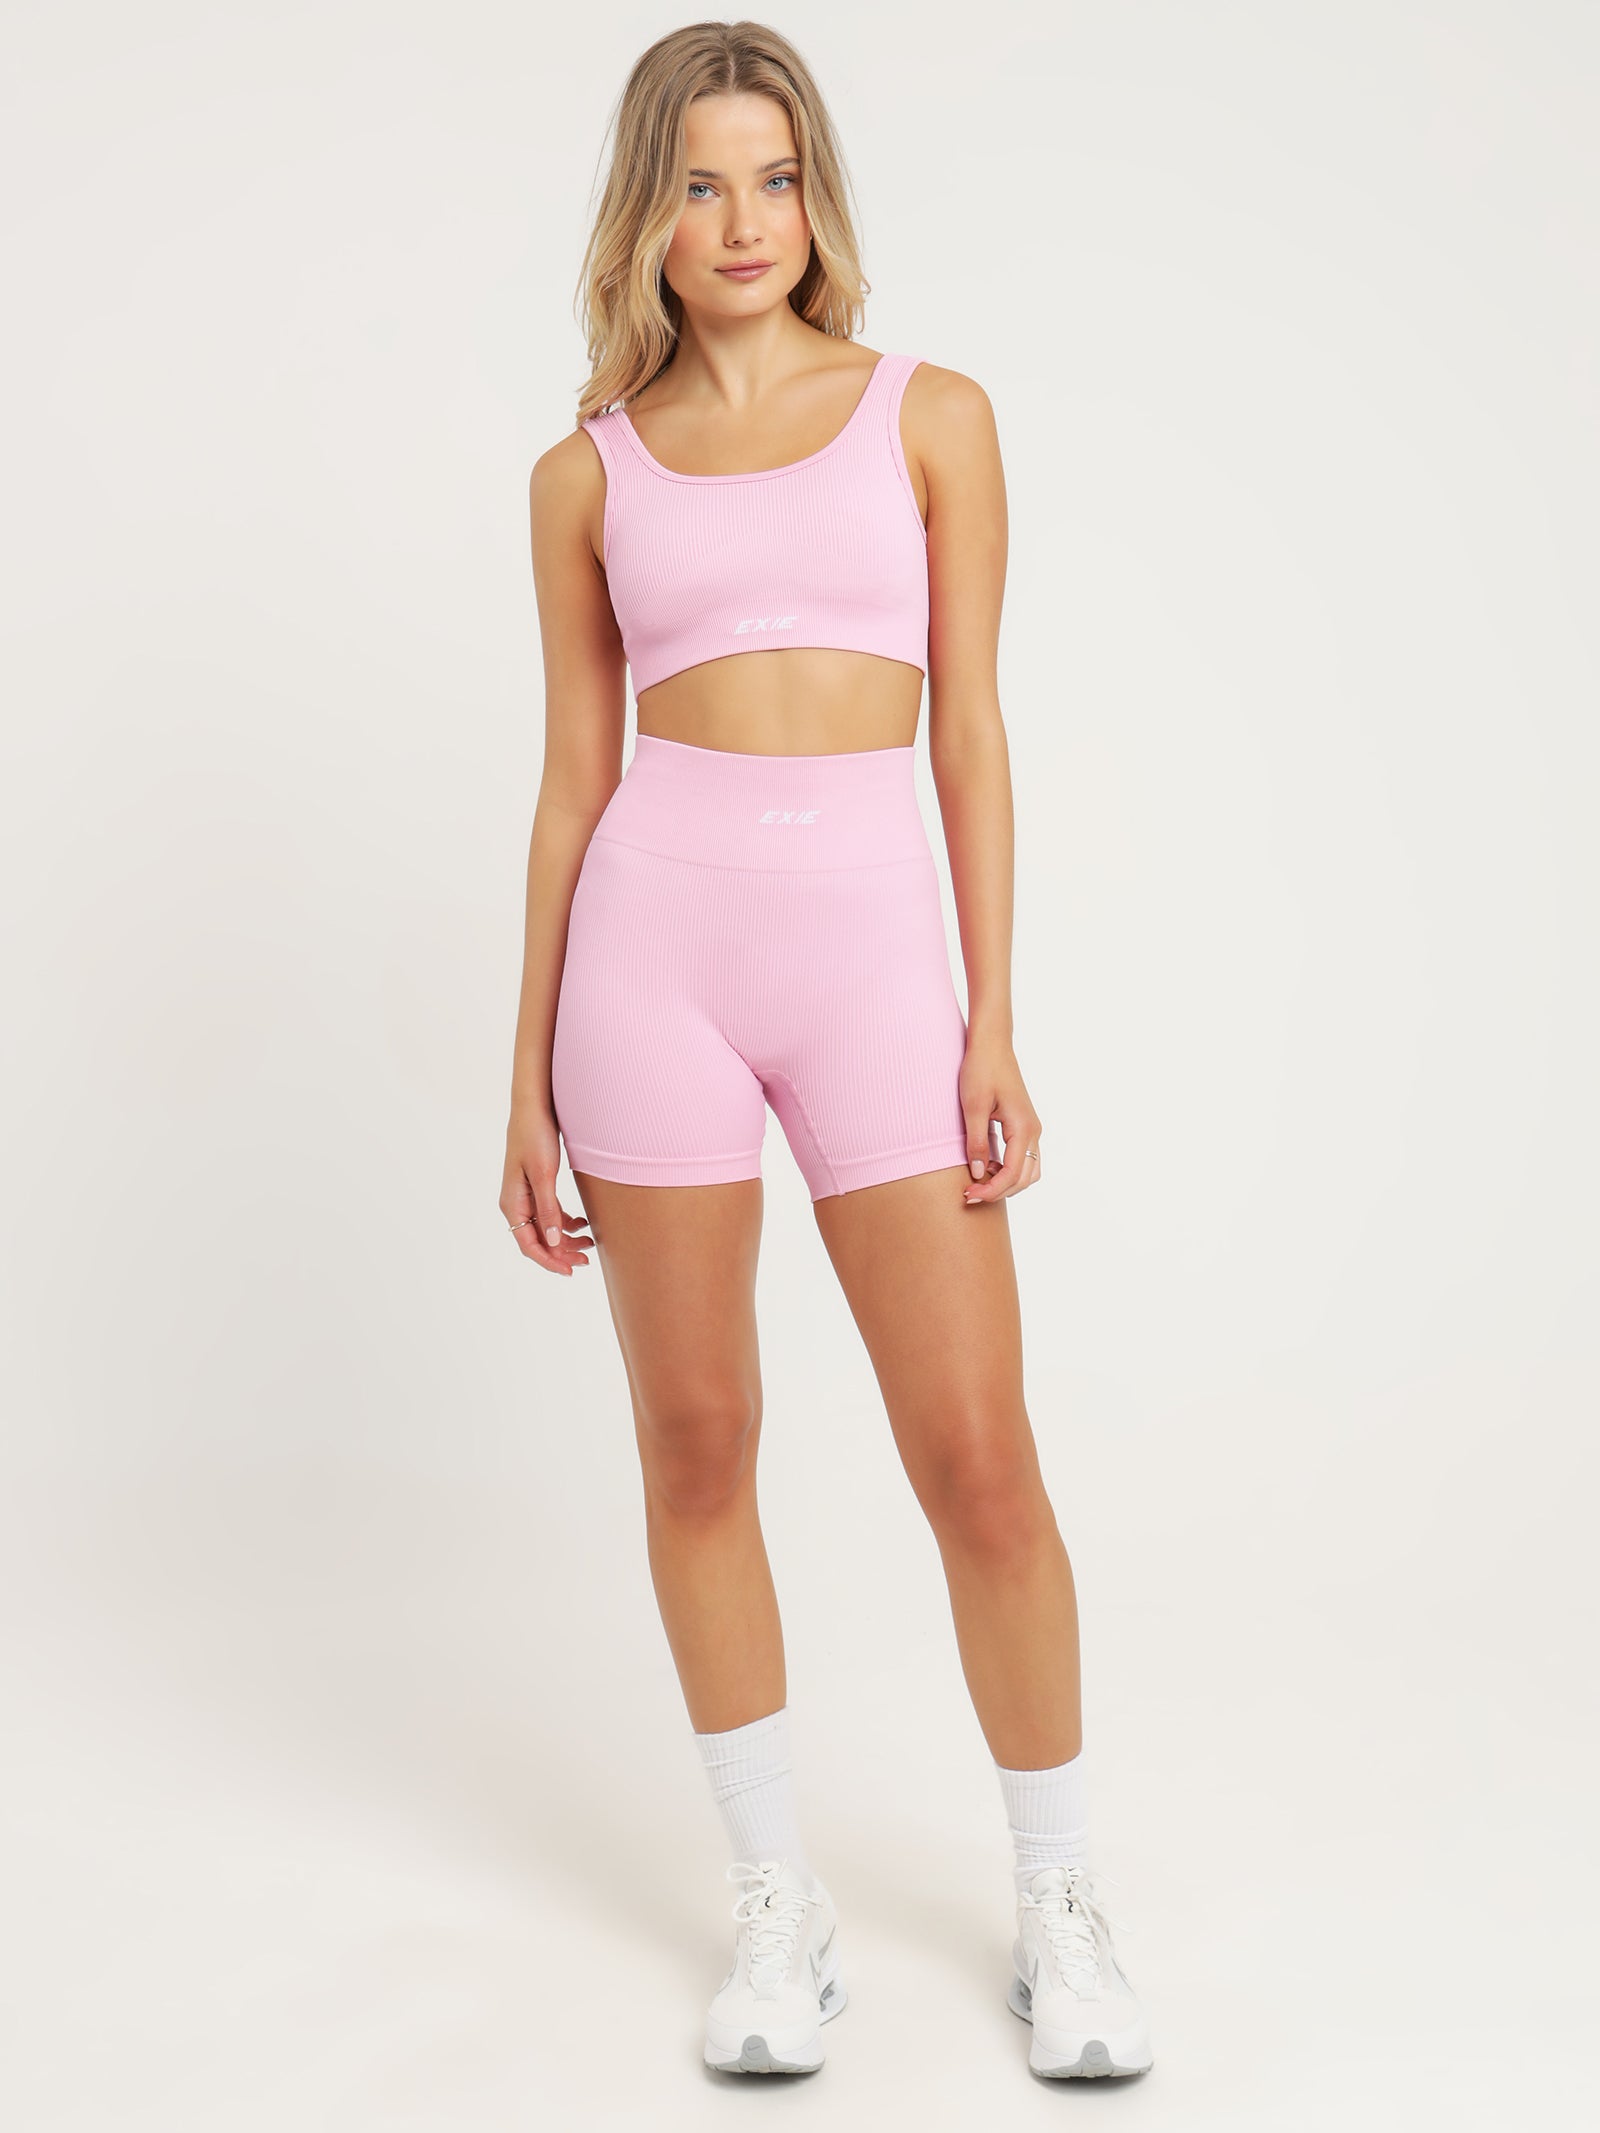 Volt Top in Candy Pink